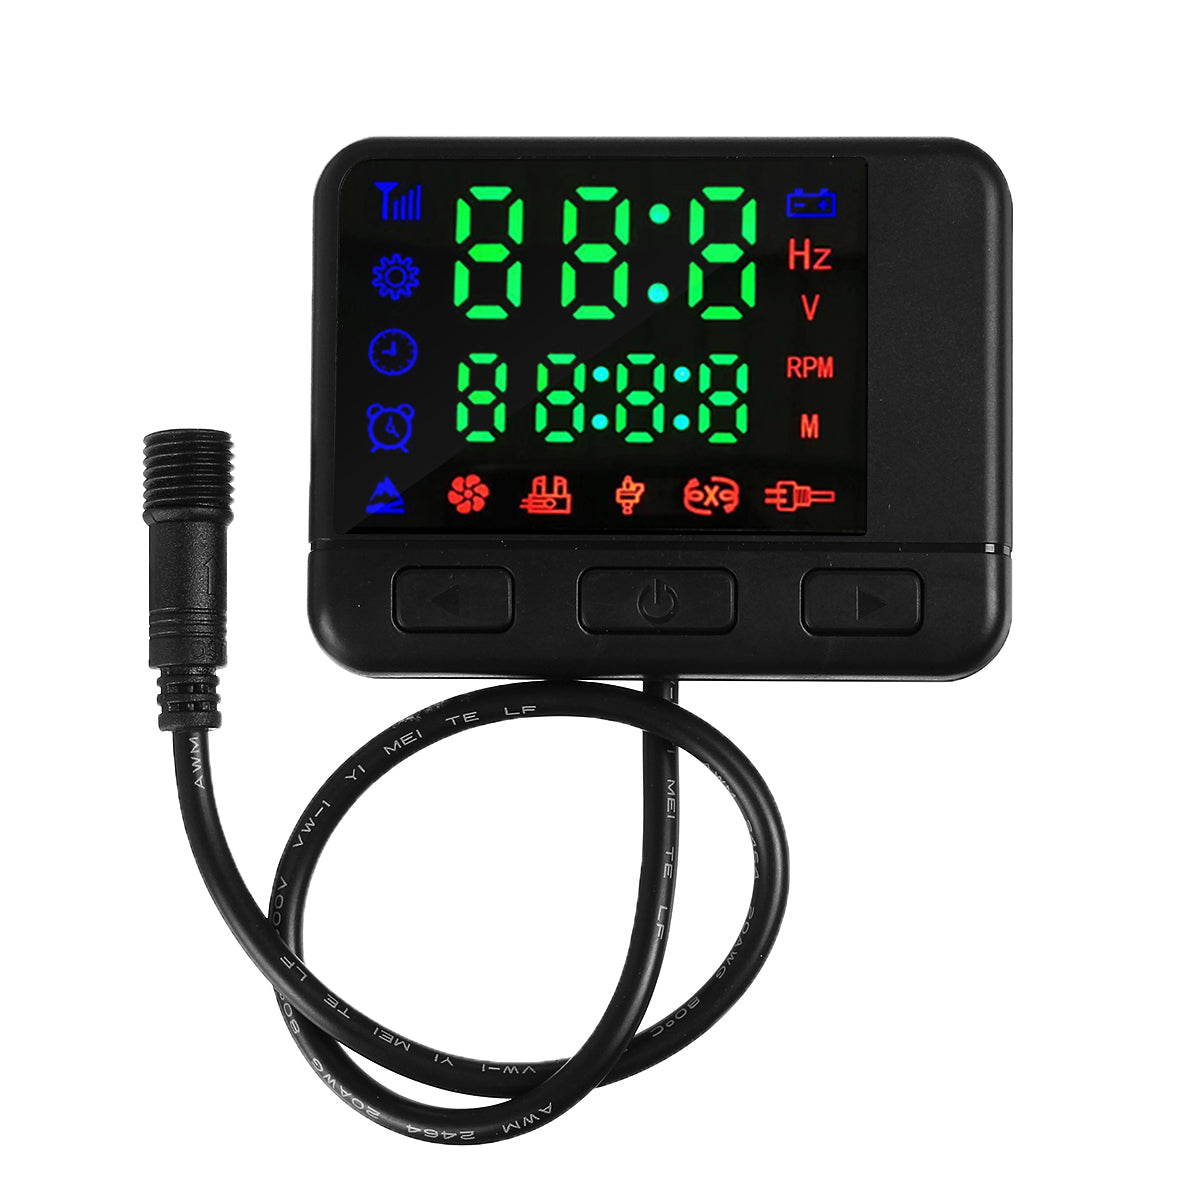 Black 12V 8KW Diesel Air Heater Car Parking Heater Black LCD Thermostat with Remote Control